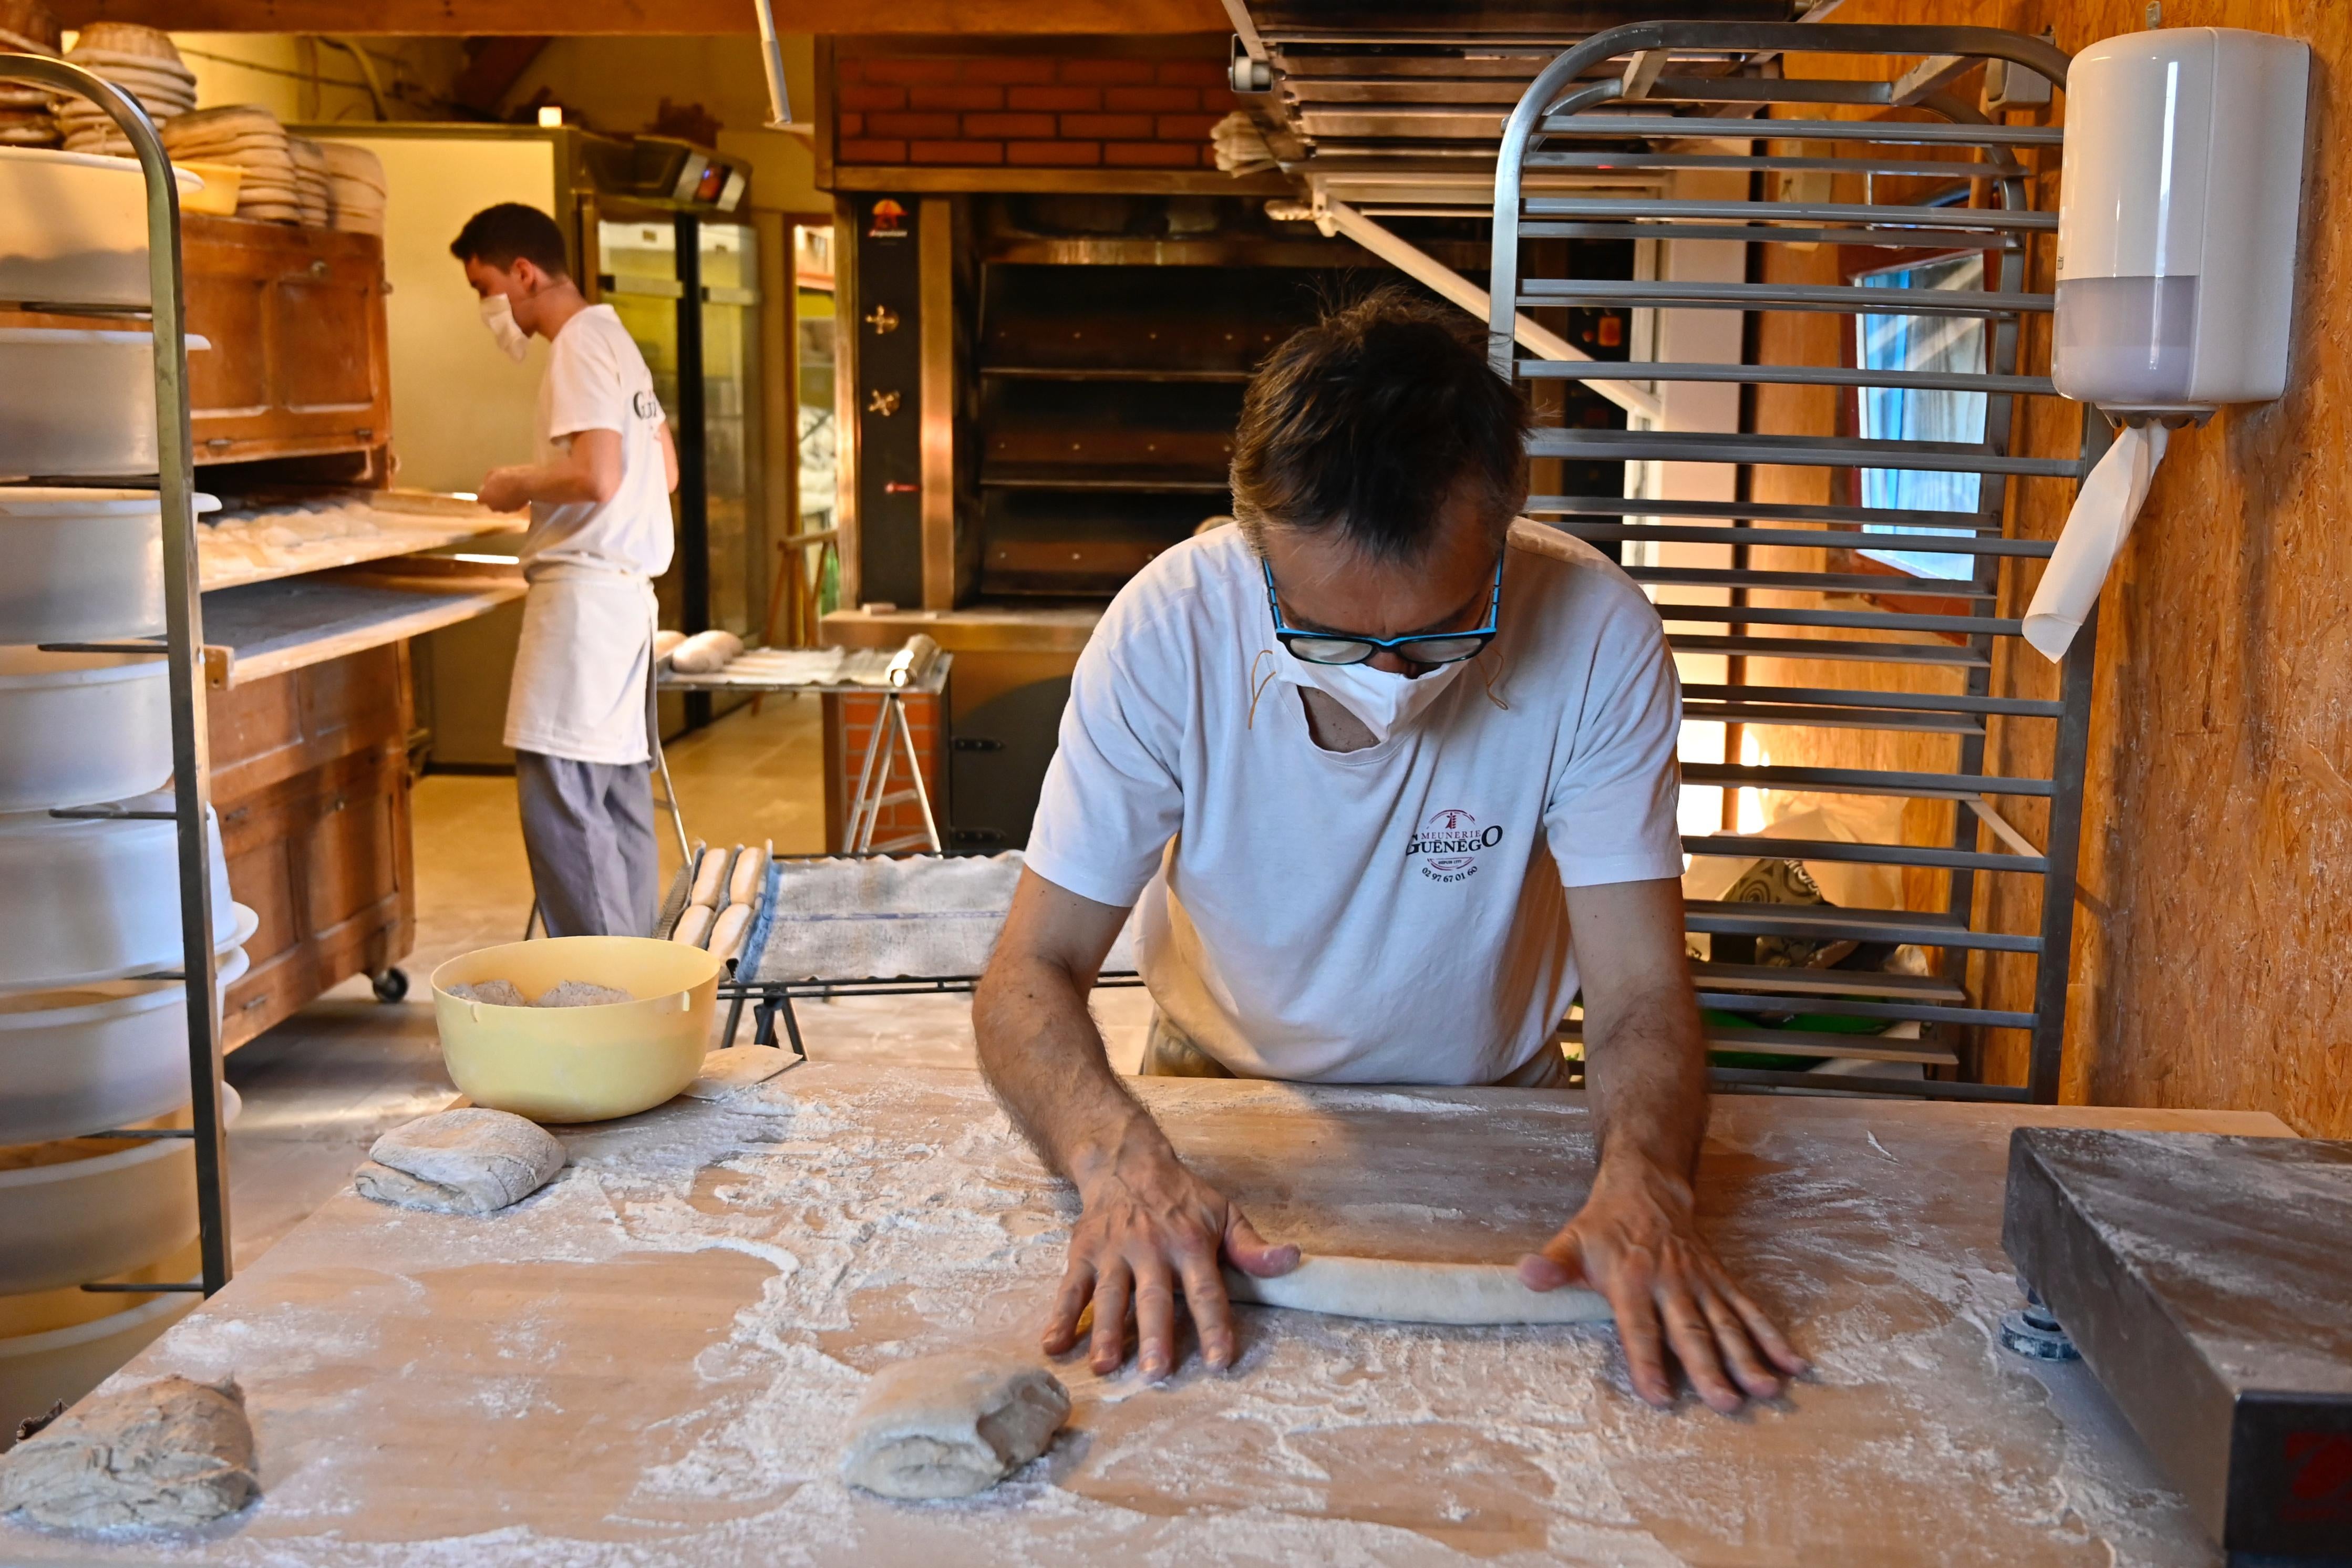 A man in the middle of the frame rolls out dough while wearing a mask. Another man in a mask works behind him.